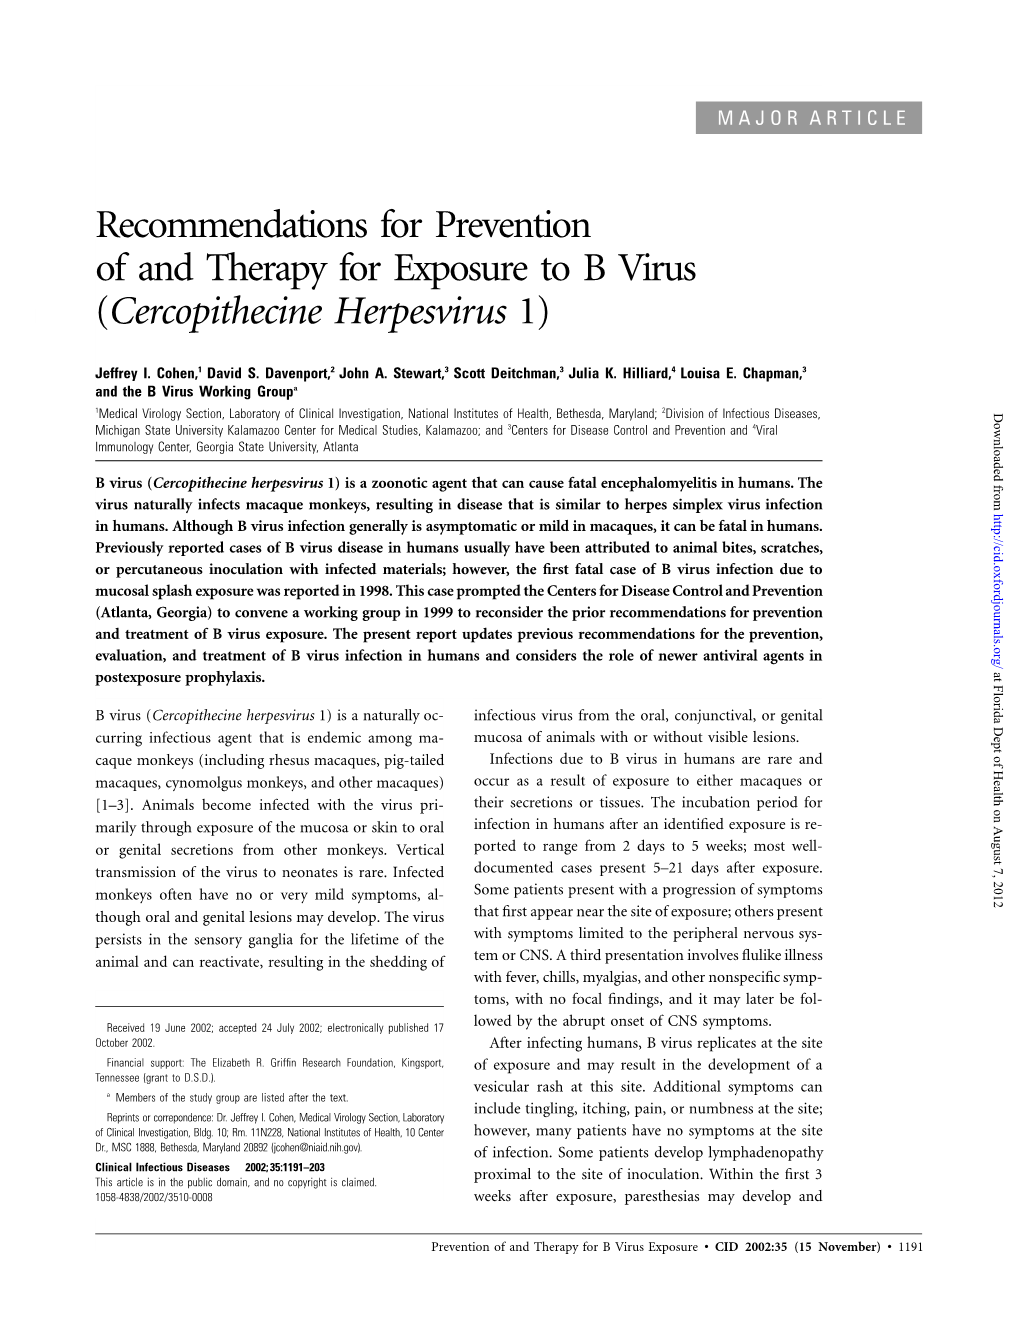 Recommendations for Prevention of and Therapy for Exposure to B Virus (Cercopithecine Herpesvirus 1)